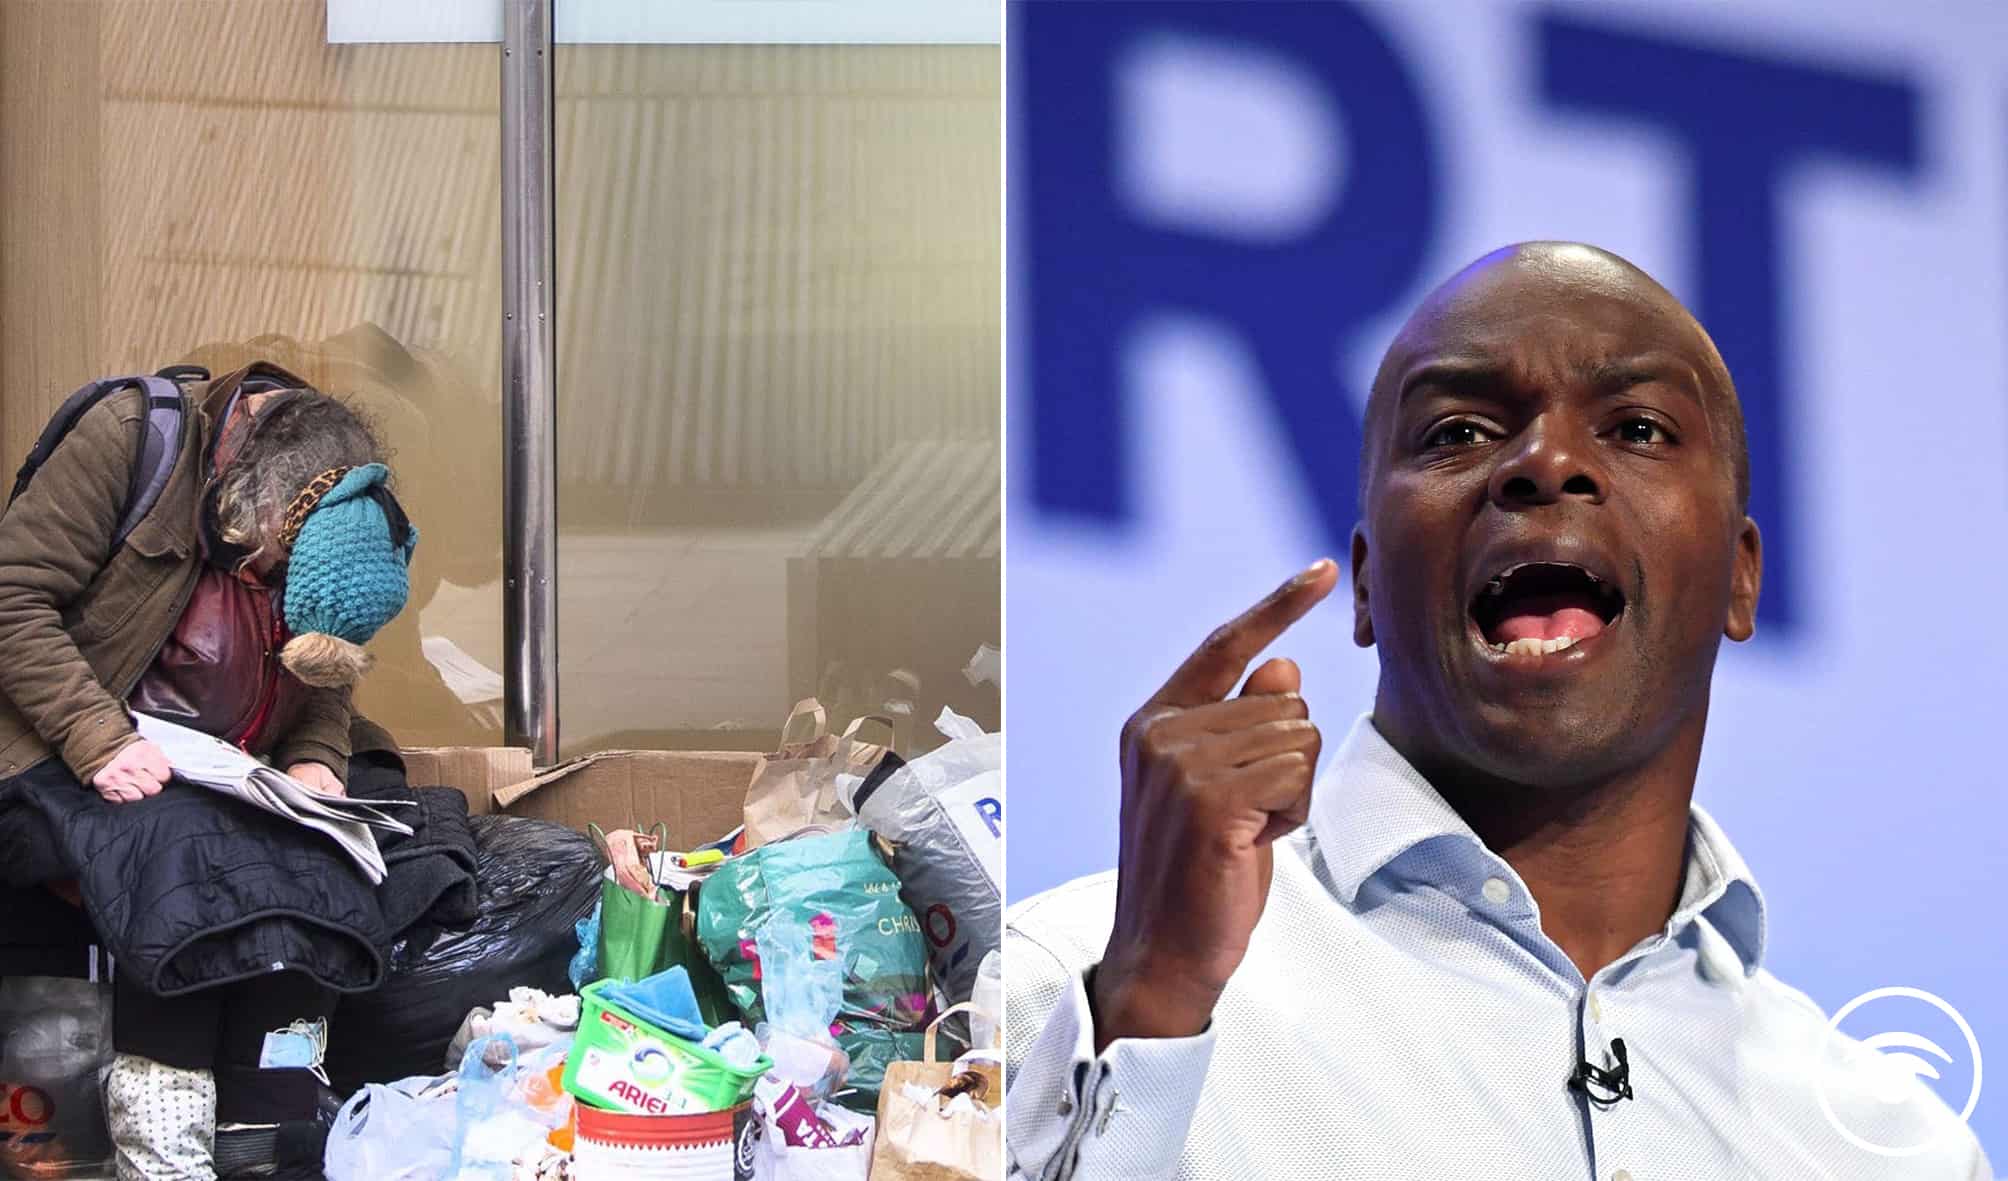 Video – Shaun Bailey ‘walking away’ from homeless person as 3,002 rough sleepers in London during 3rd lockdown